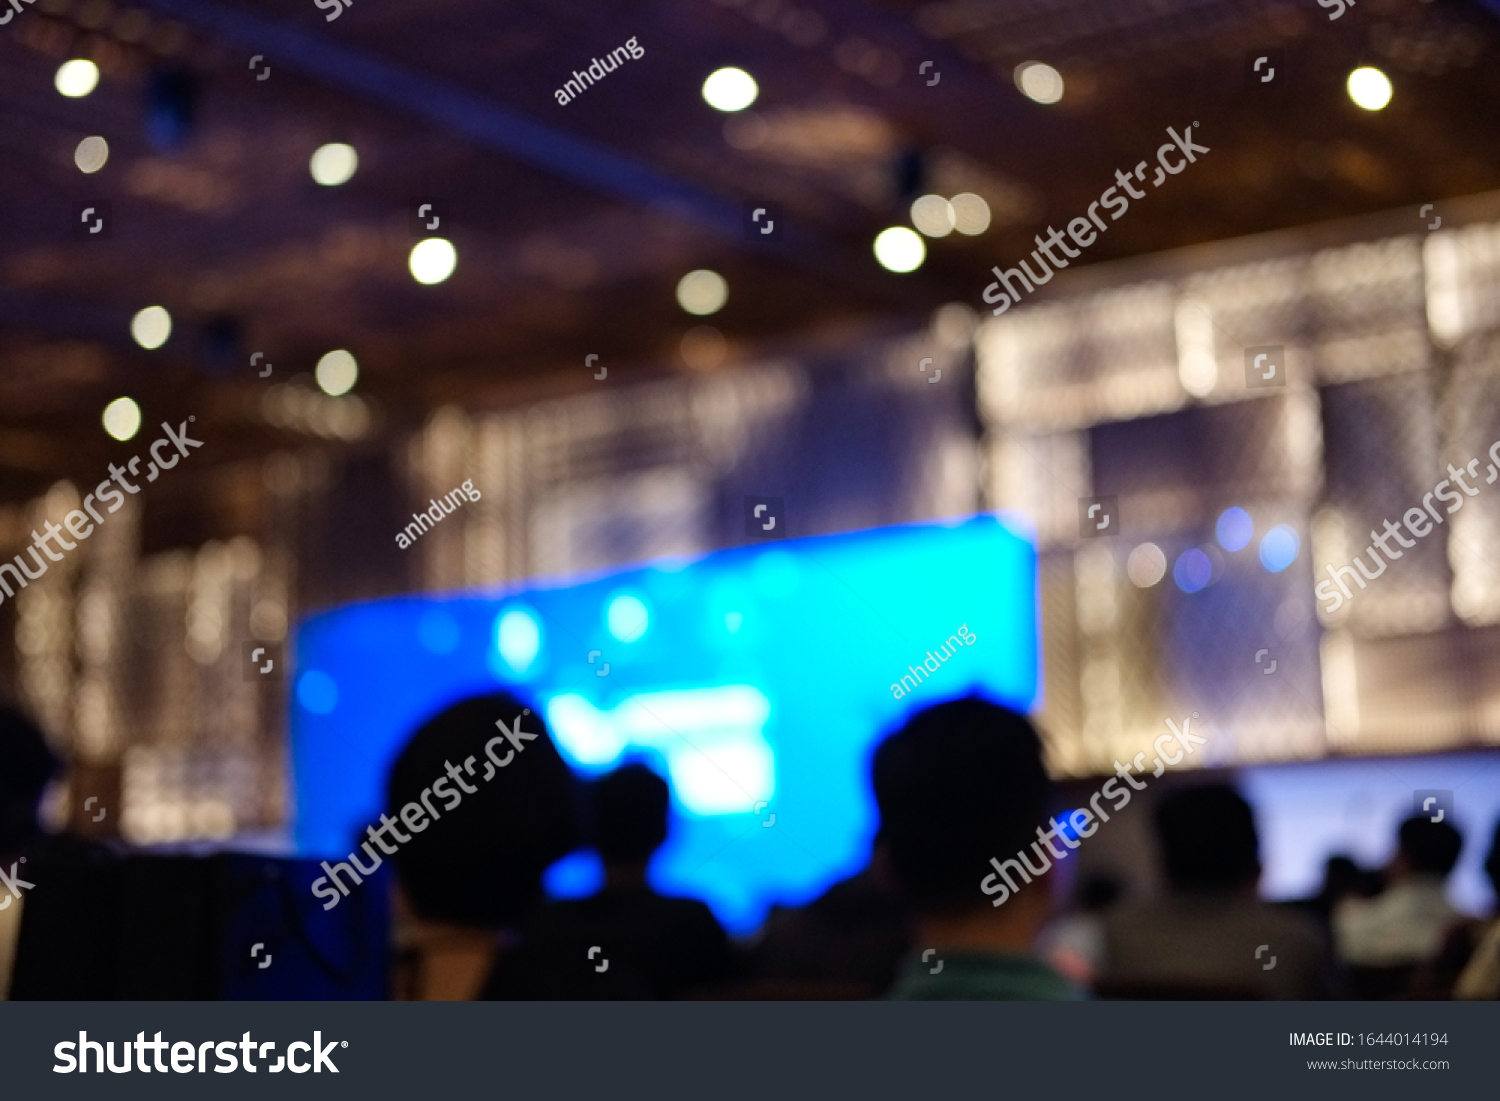 Blurred background, blurred people. Royalty high quality free stock of abstract blur and defocused of audience in a conference room. #1644014194